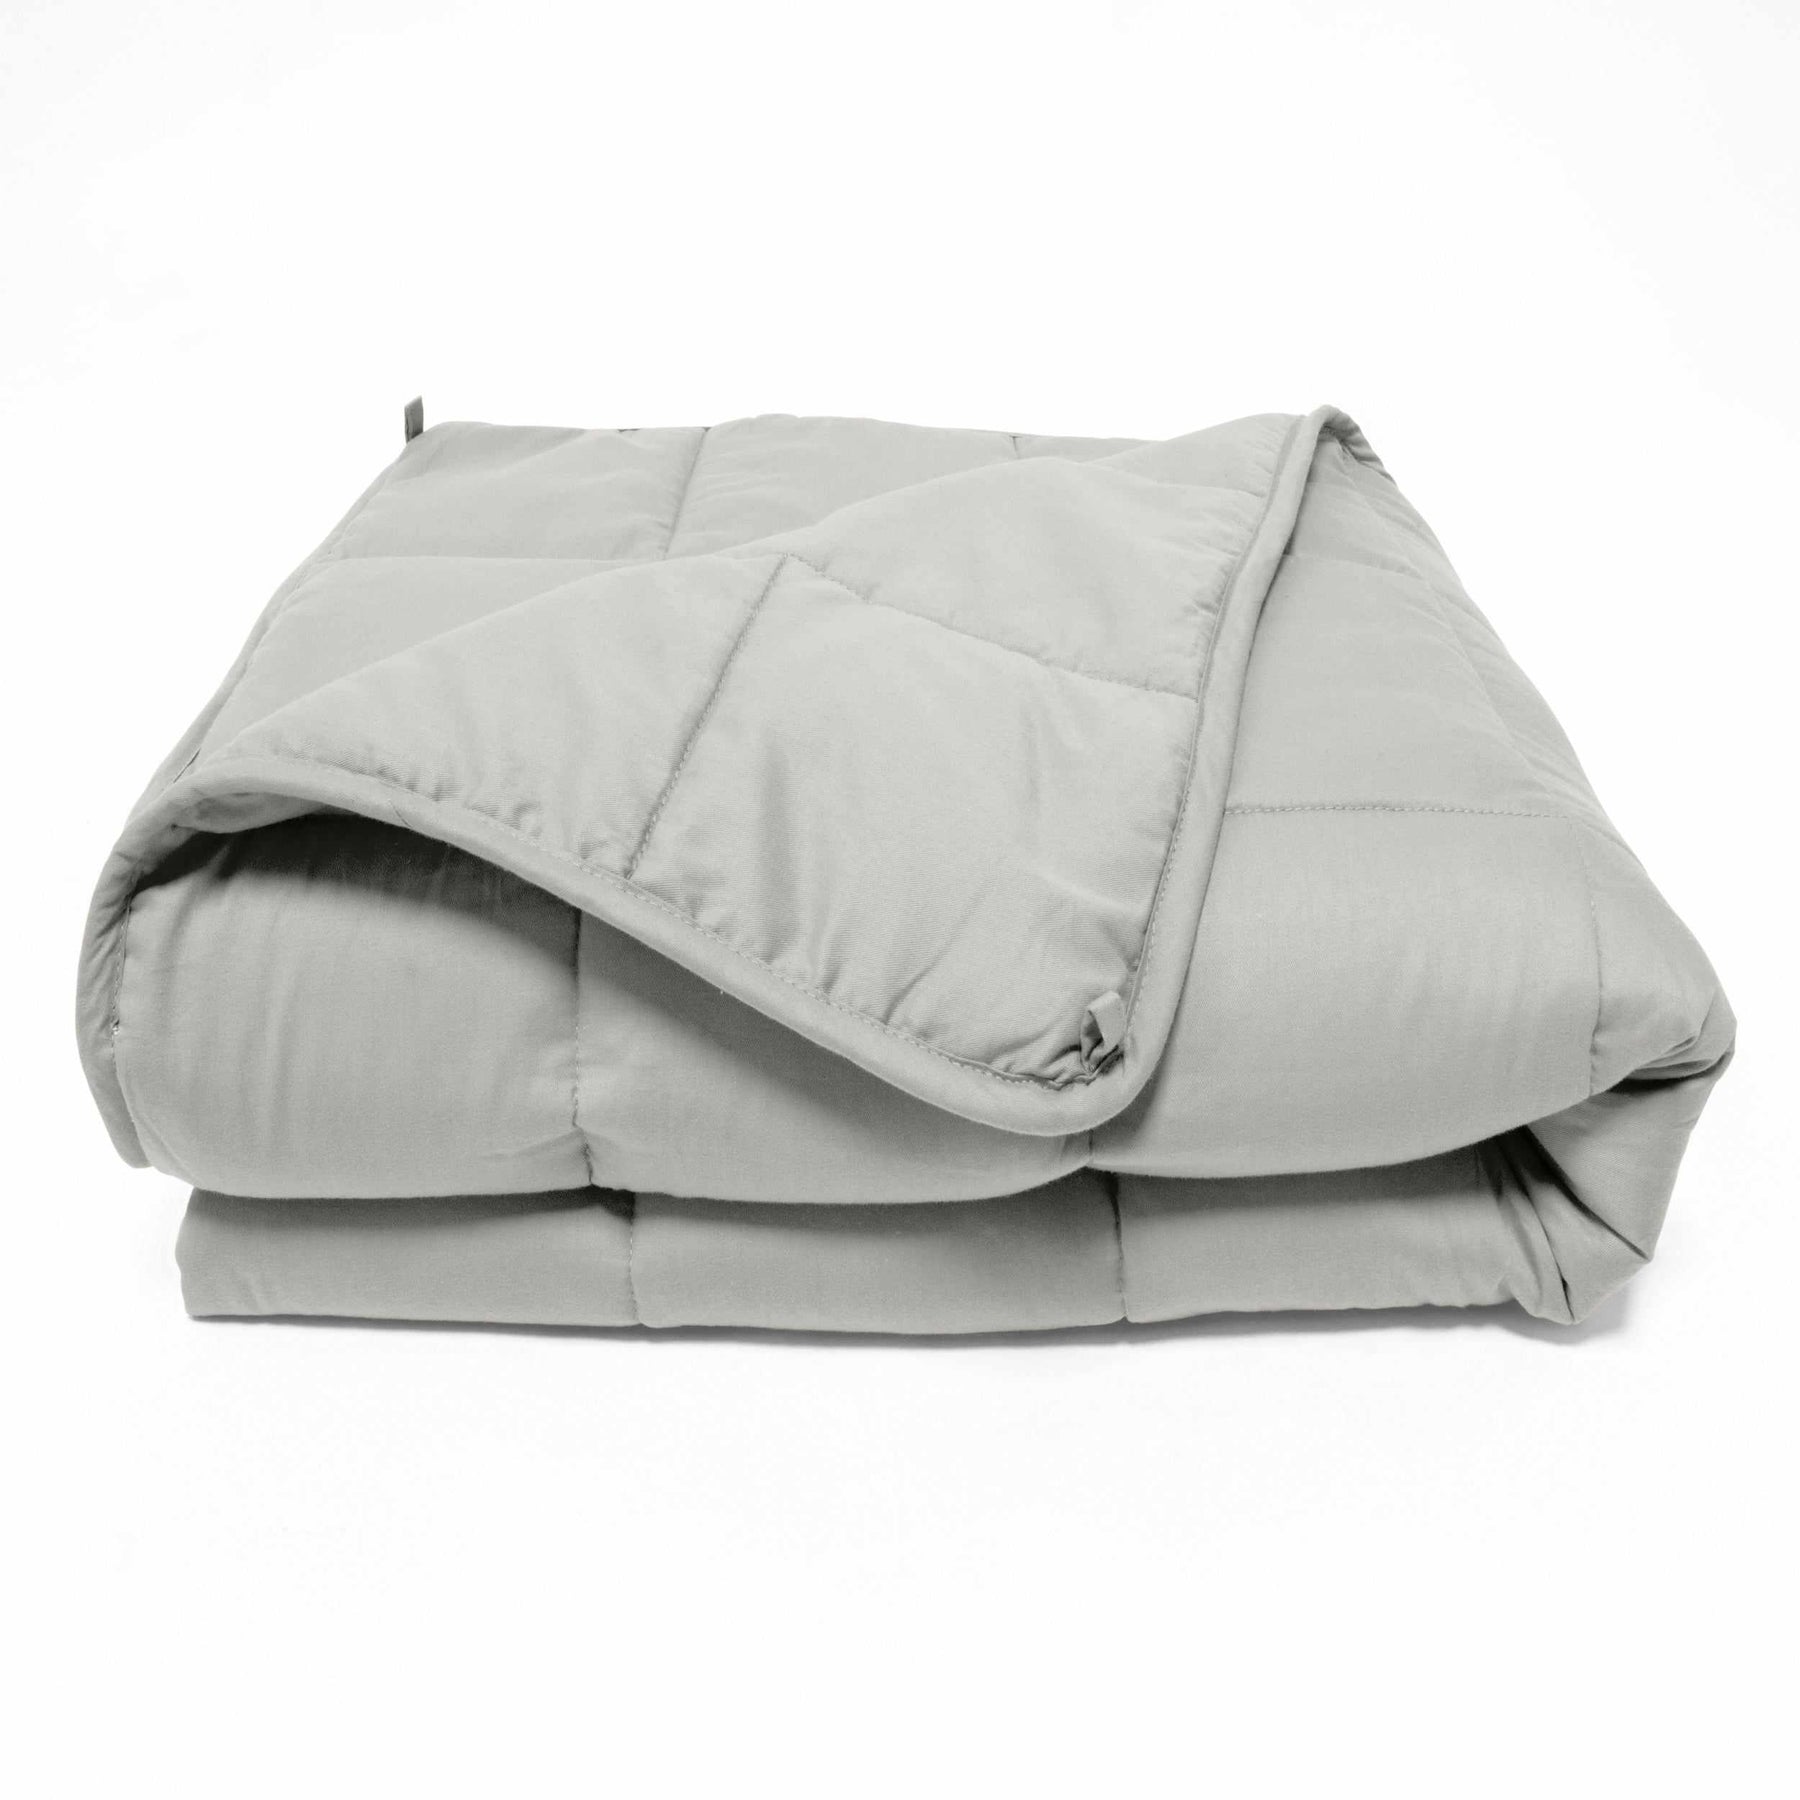 Weighted Quilted Cotton Throw Blanket - Silver